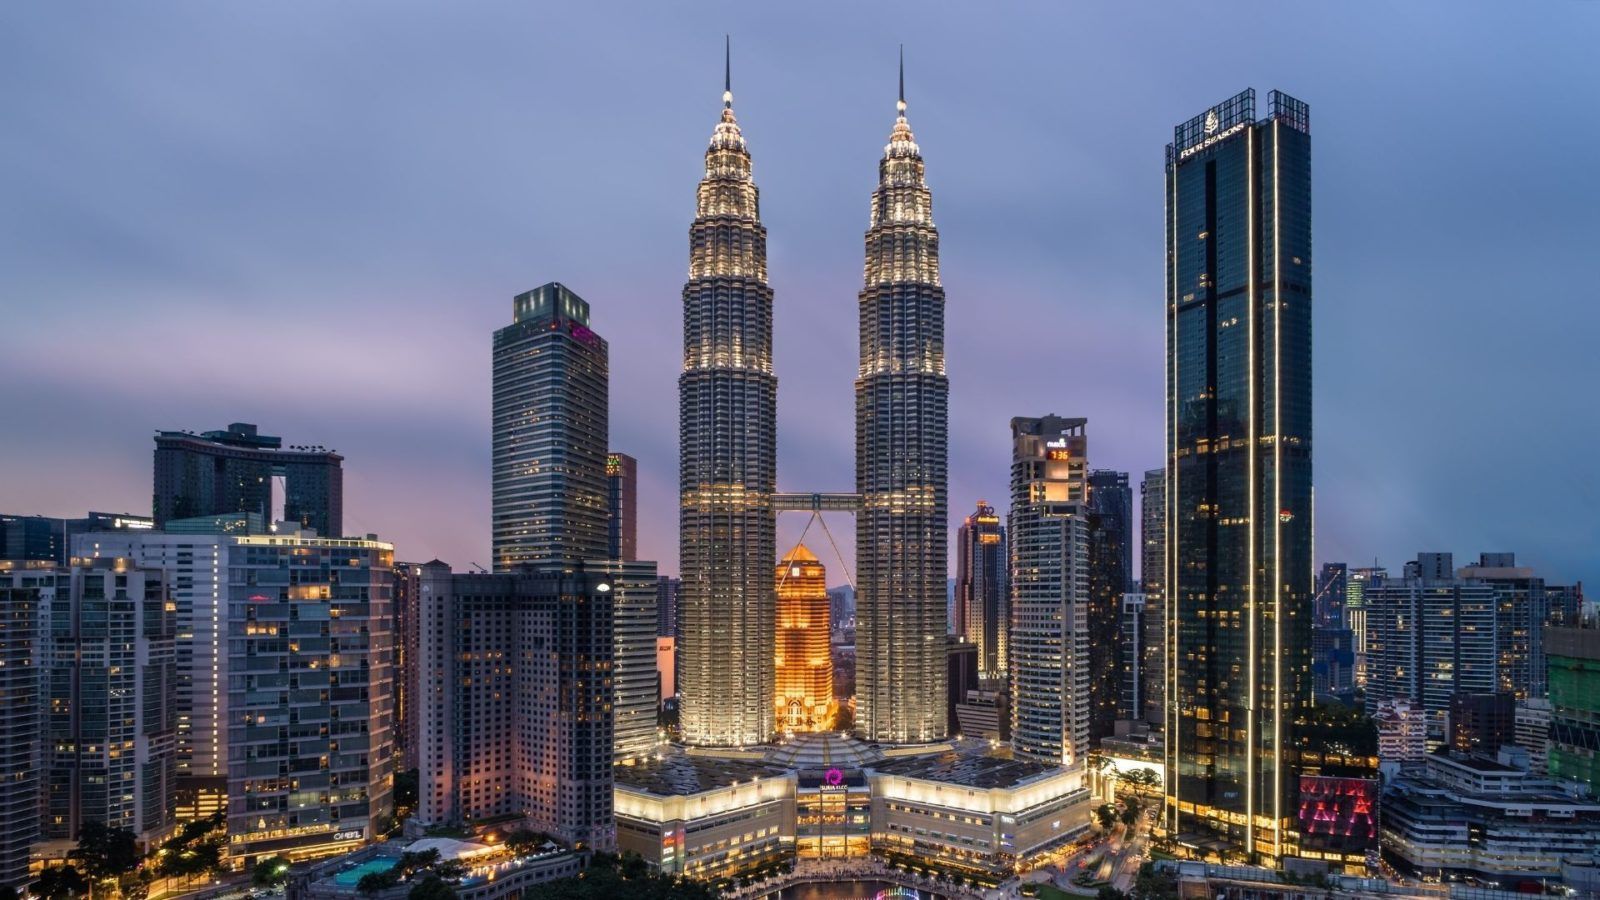 Malaysia ranks 13th as the most desired country to relocate to in the world